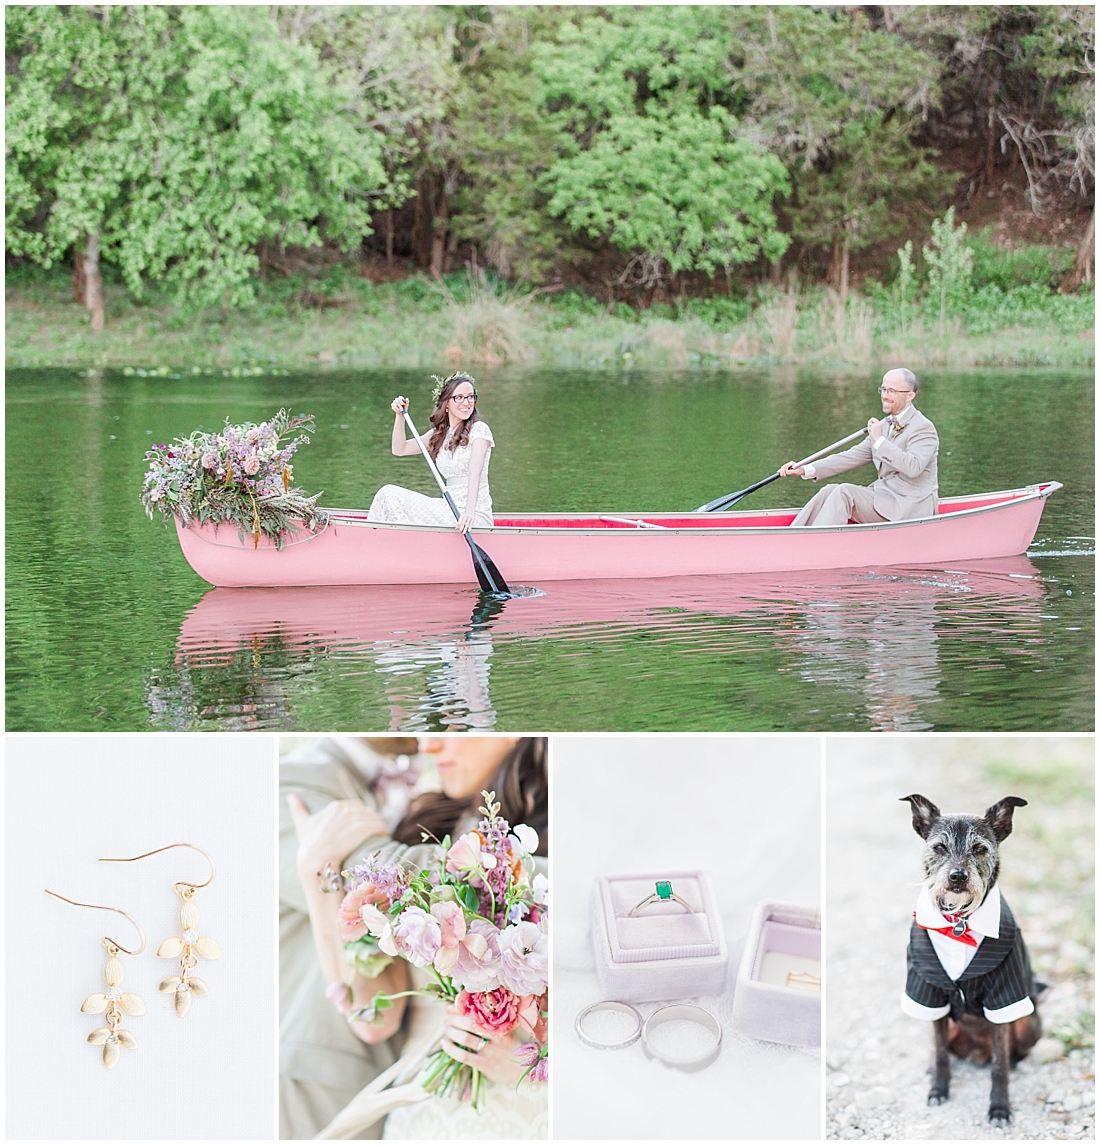 A minimalist ranch wedding in the Texas Hill Country featuring a canoe bridal party entrance and night portrait. 0089